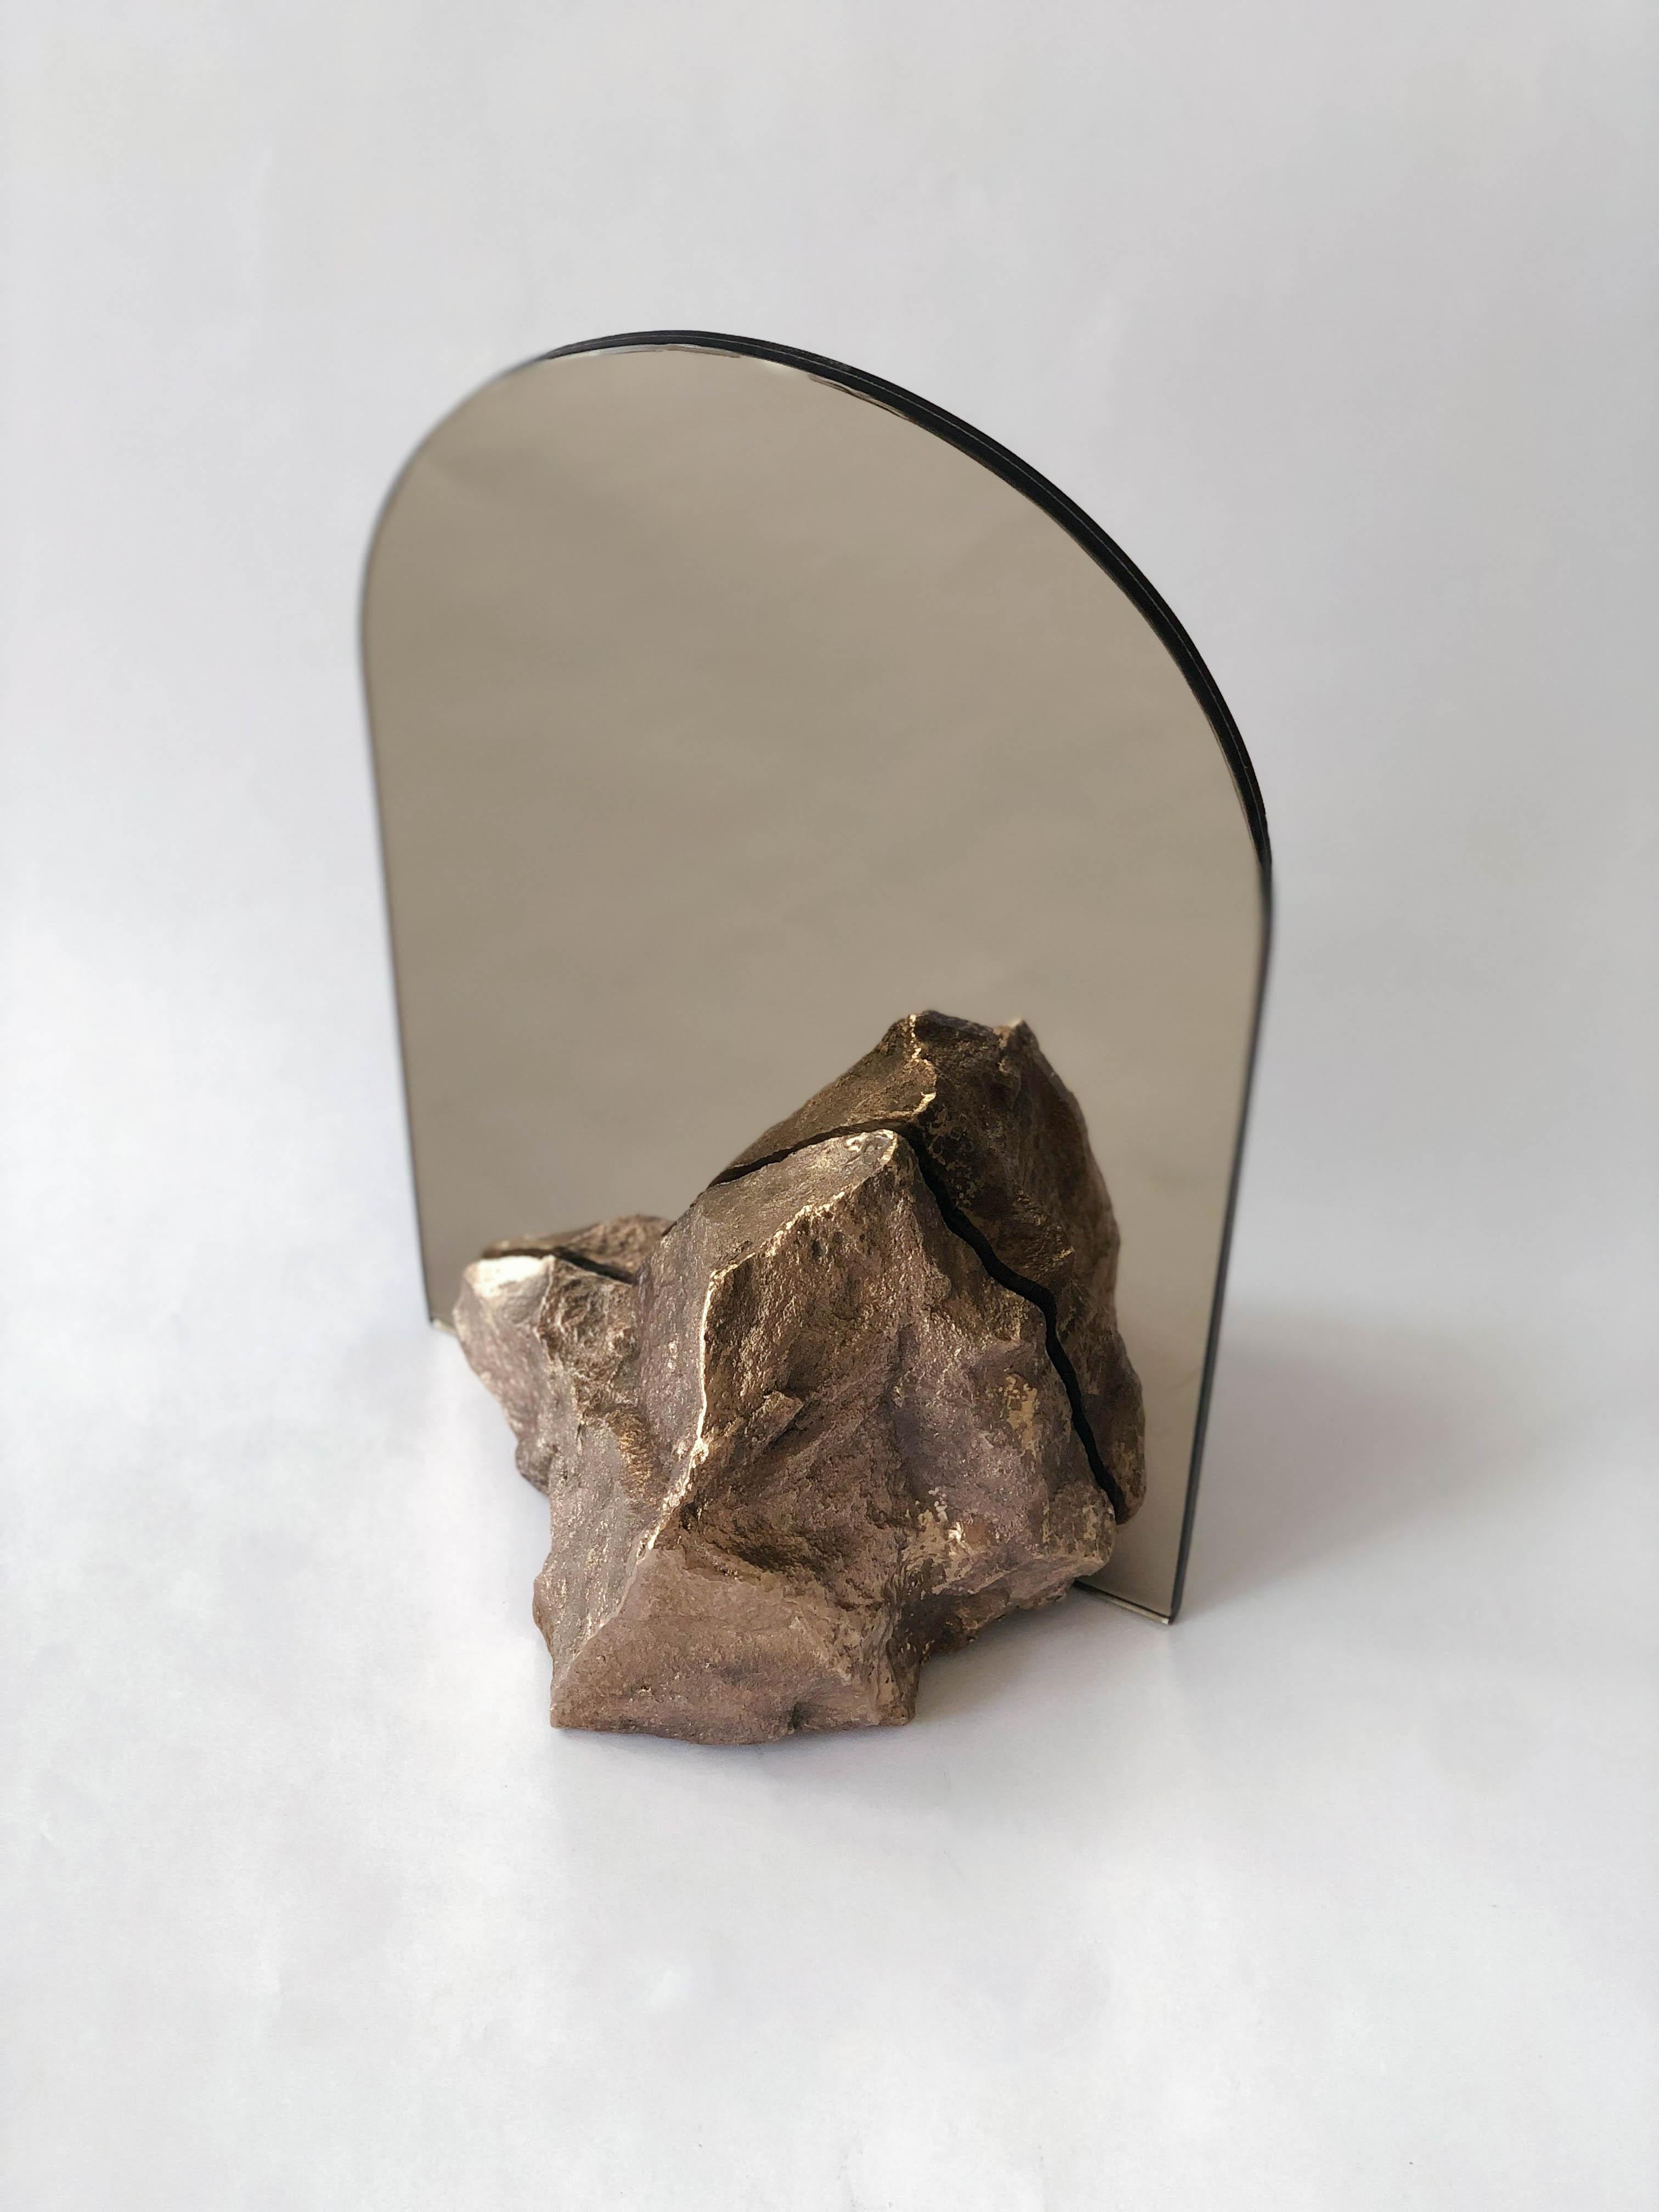 Bronze mirror - Dessislava Madanska
Onedesignspace
Title: Mirror, Mirror
Object: Desk Mirror
Dimensions: W 20 x D 20 x H 30 cm
Materials: double-sided mirror, copper tinted and stone shape
structure casted in bronze. Patinated.

Dessislava Madanska